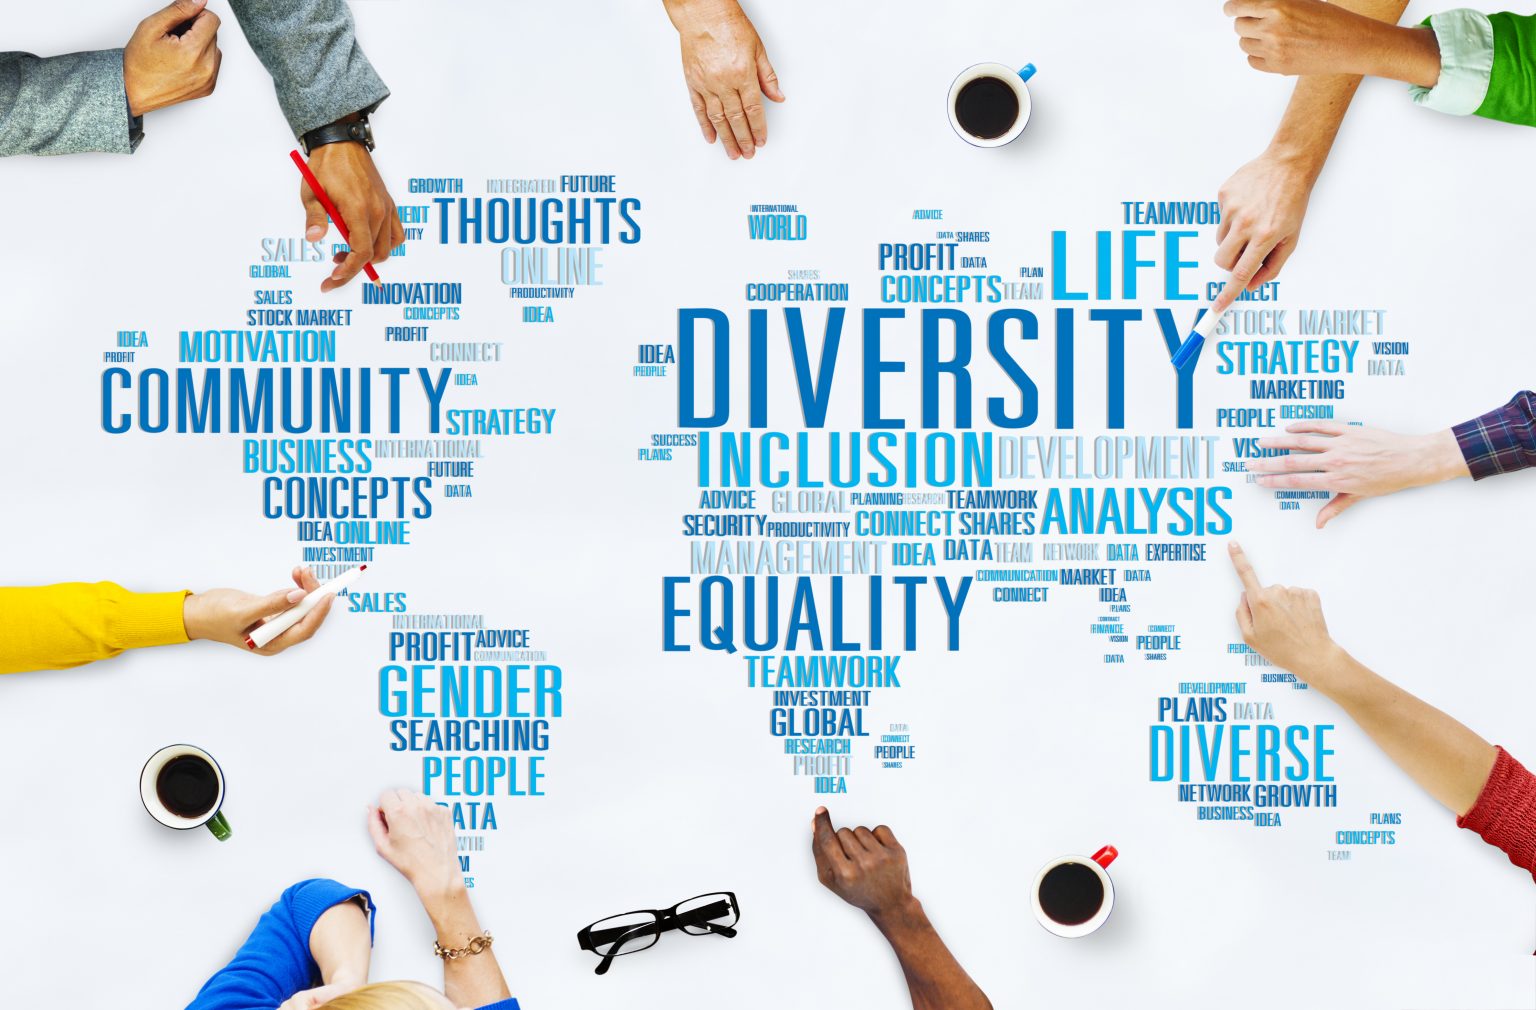 Diversity Equity Inclusion Accessibility Council Amherst Chamber